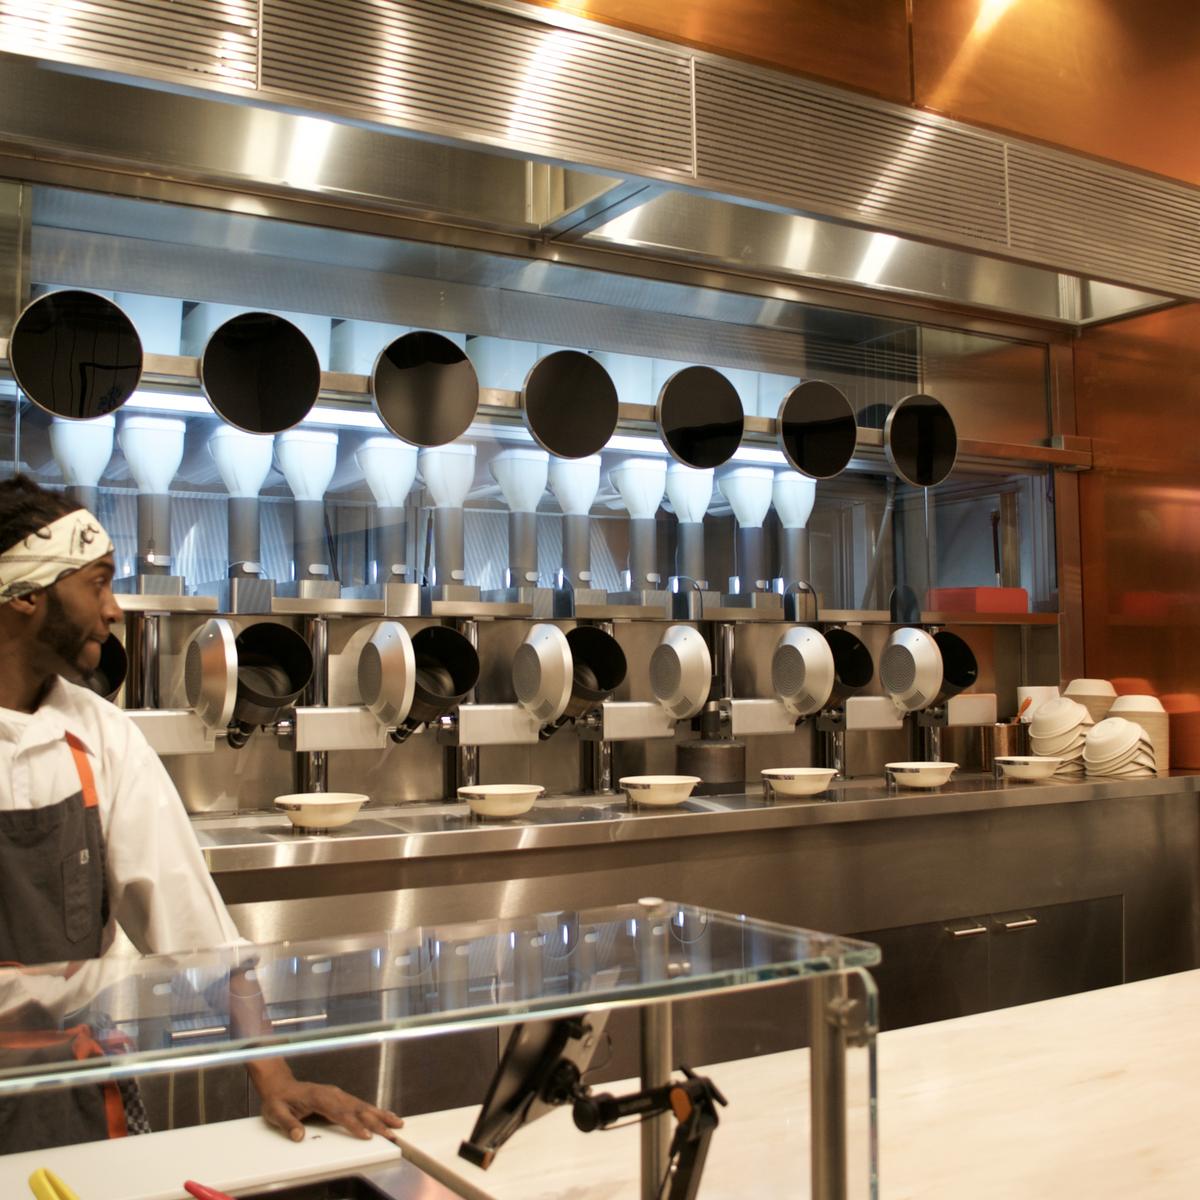 Spyce Restaurant Uses a Robotic Kitchen to Cook Your Food